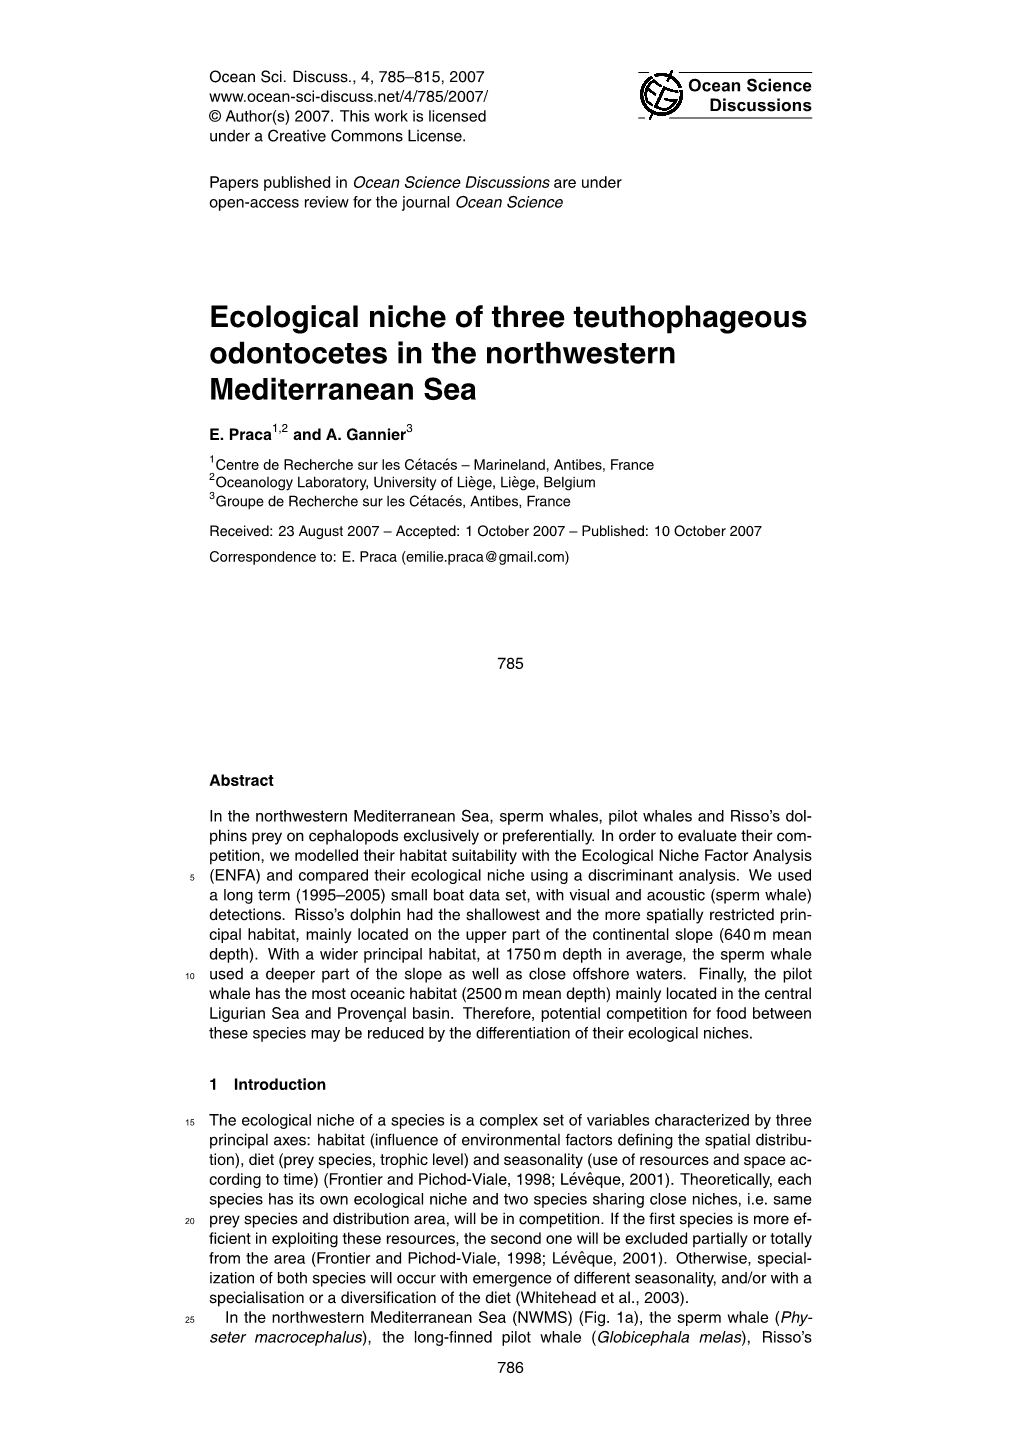 Ecological Niche of Three Teuthophageous Odontocetes in the Northwestern Mediterranean Sea